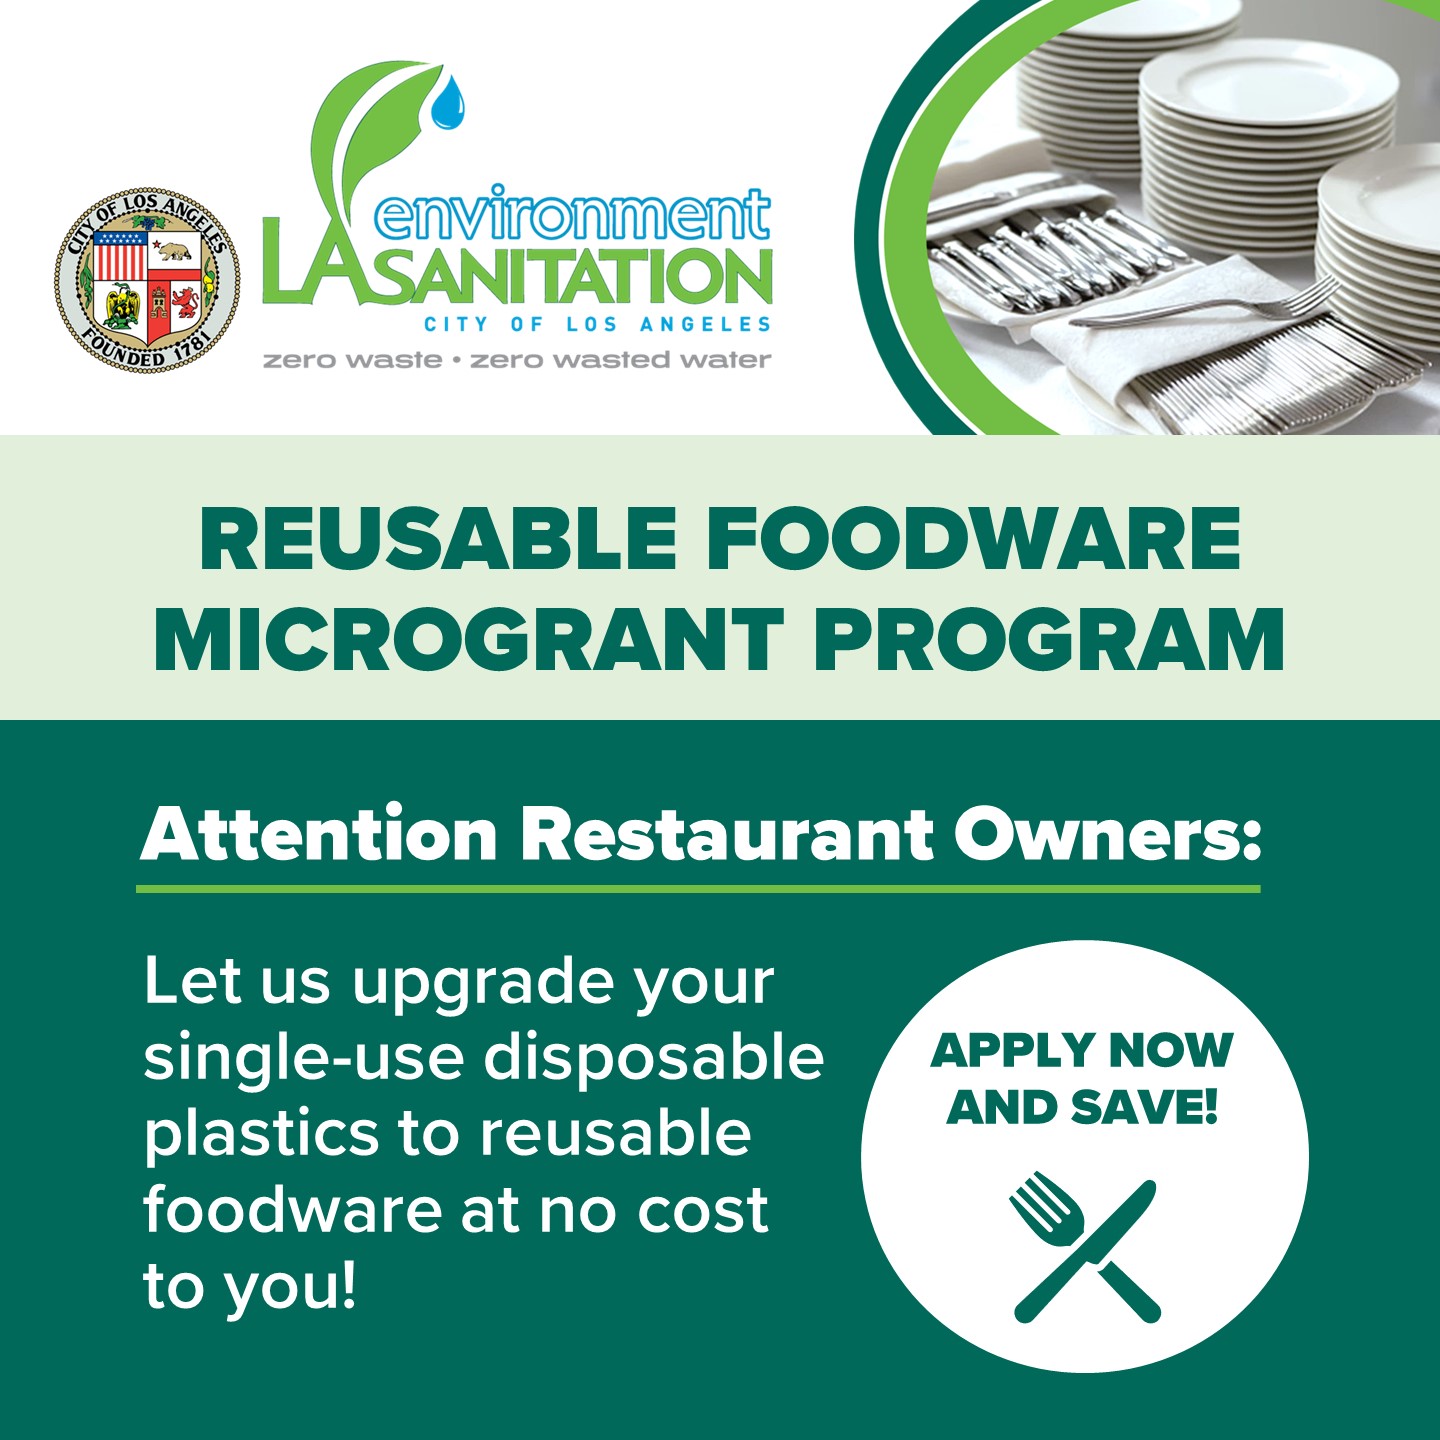 LASAN flyer showcasing reusable plates and silverware, informing restaurant owners of this microgrant program